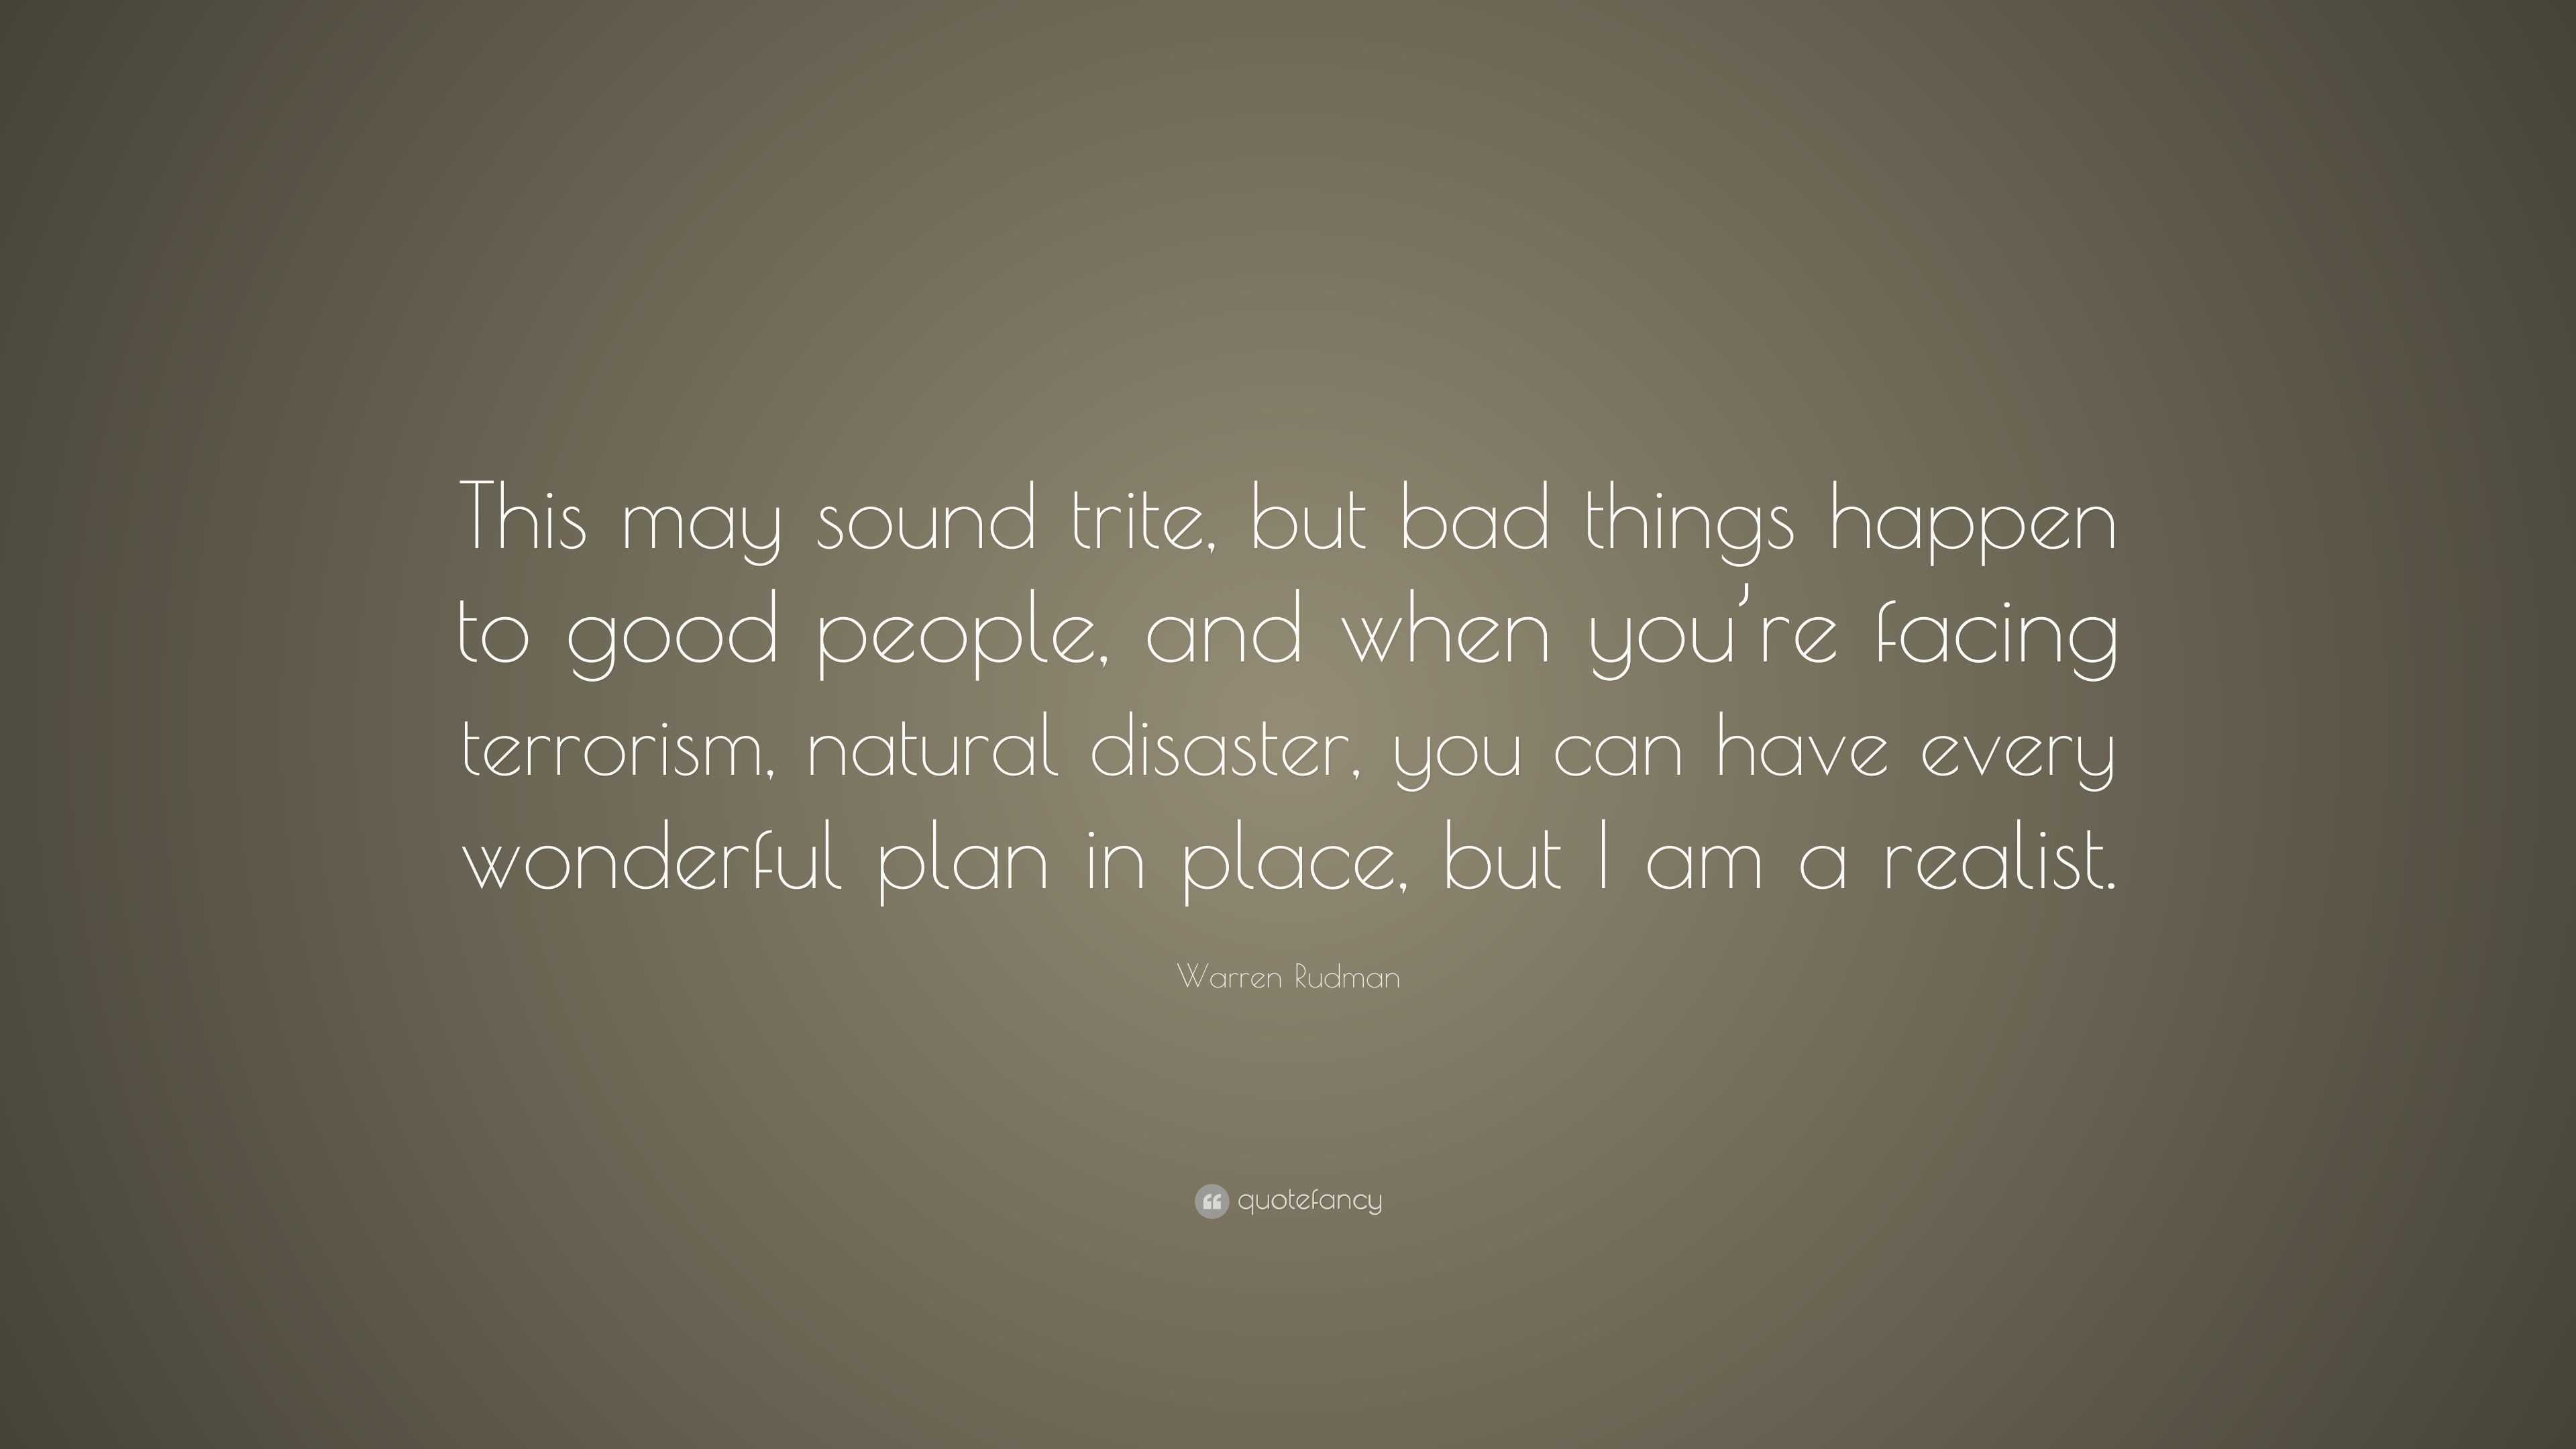 Warren Rudman Quote: “This may sound trite, but bad things happen to ...